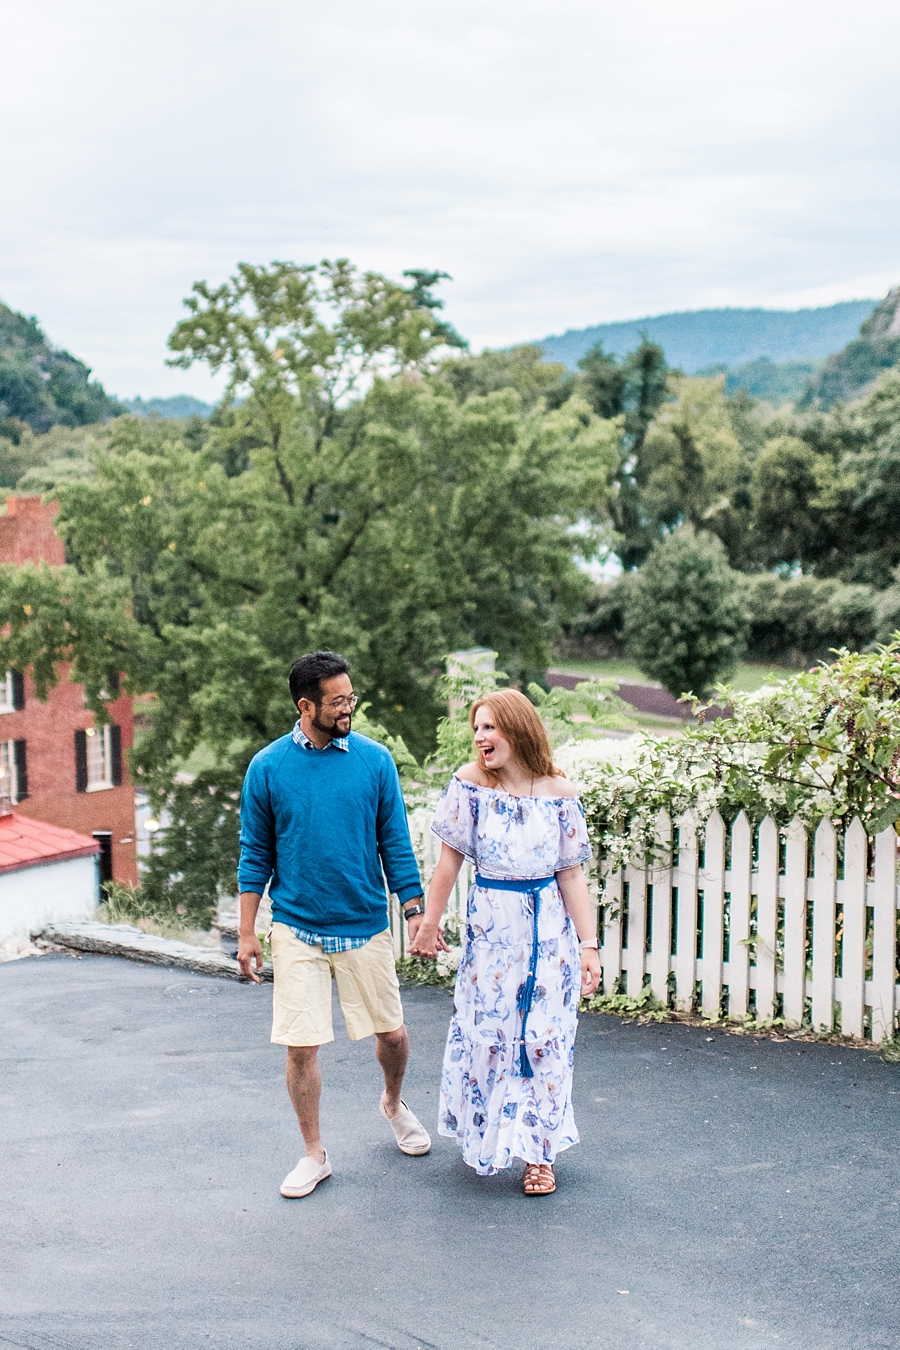 Jonah and Hannah | Harpers Ferry, WV Engagement Photographer